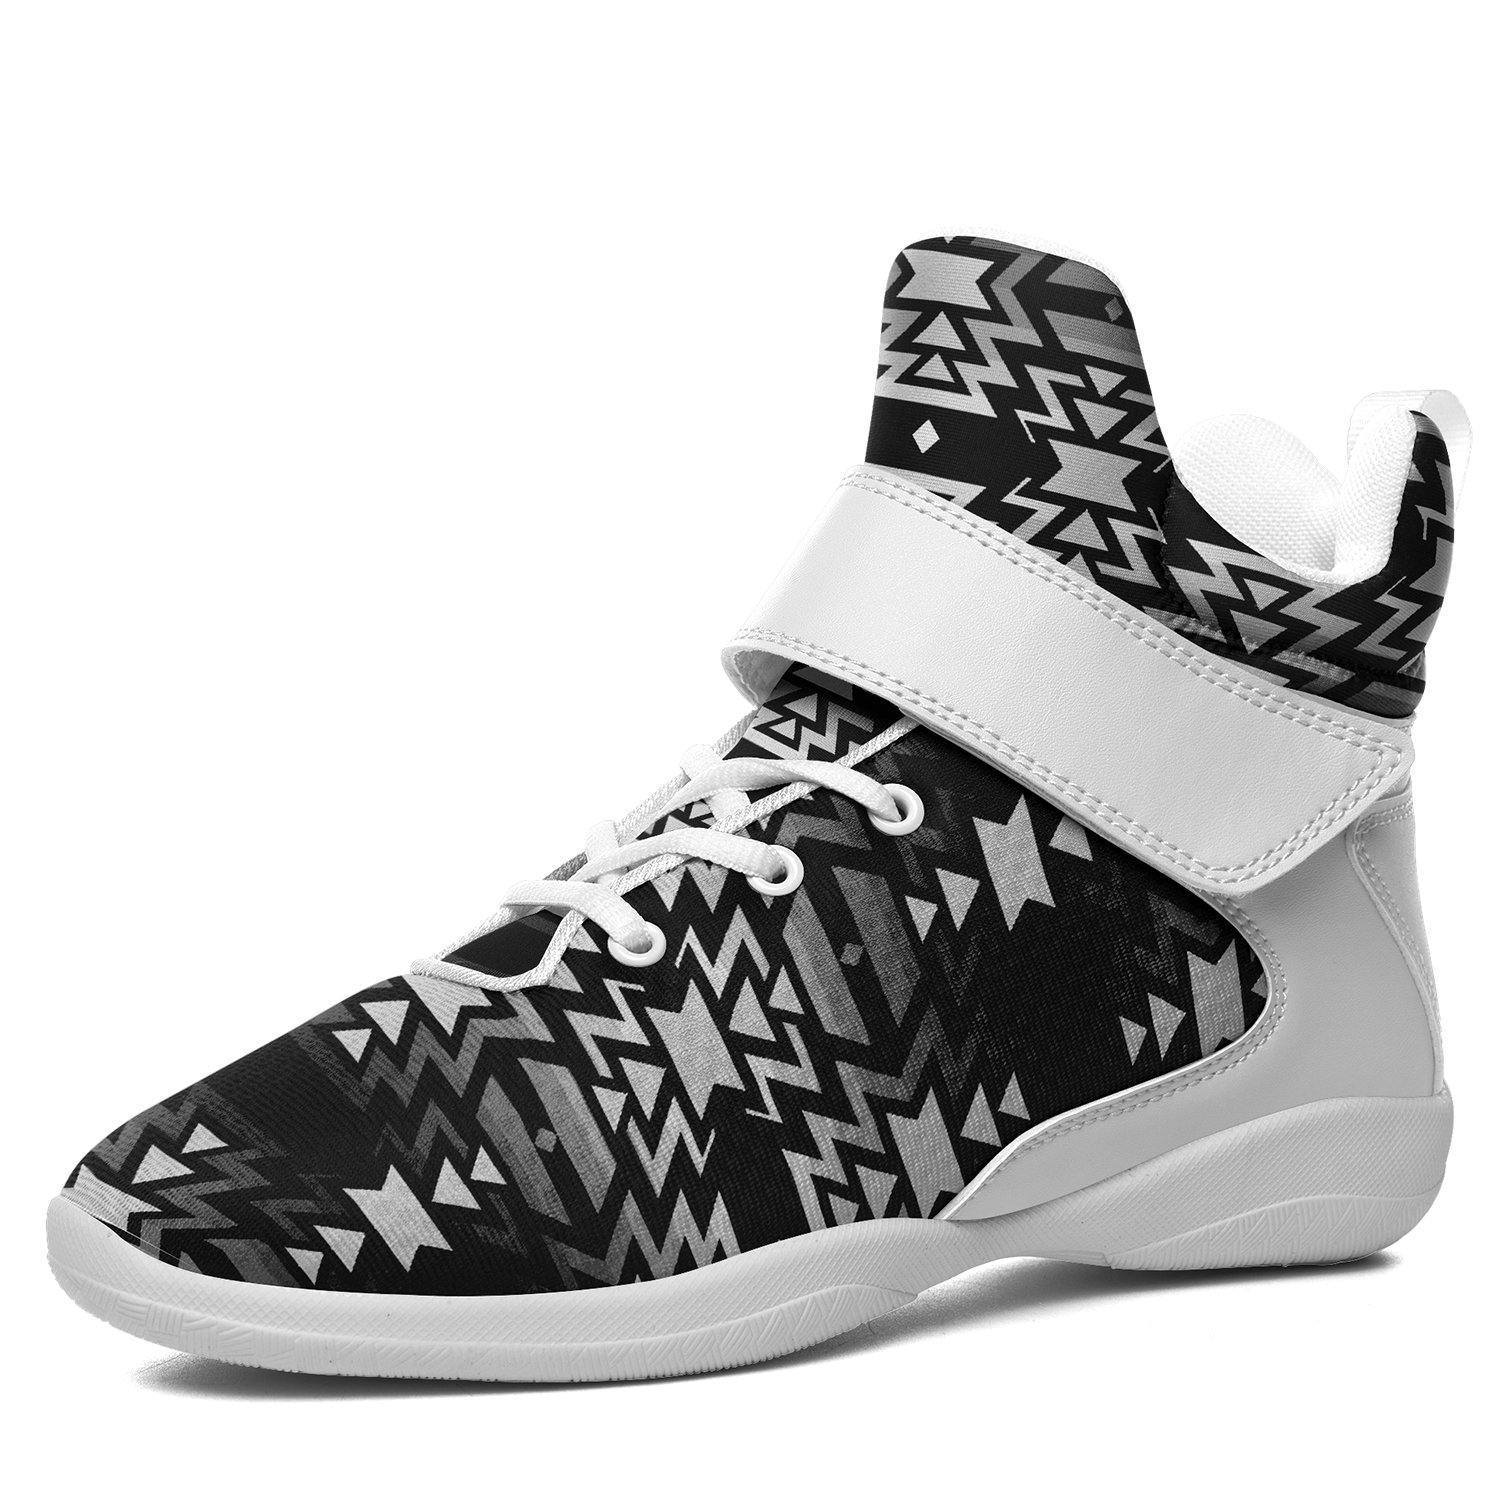 Black Fire Black and White Kid's Ipottaa Basketball / Sport High Top Shoes 49 Dzine US Women 4.5 / US Youth 3.5 / EUR 35 White Sole with White Strap 